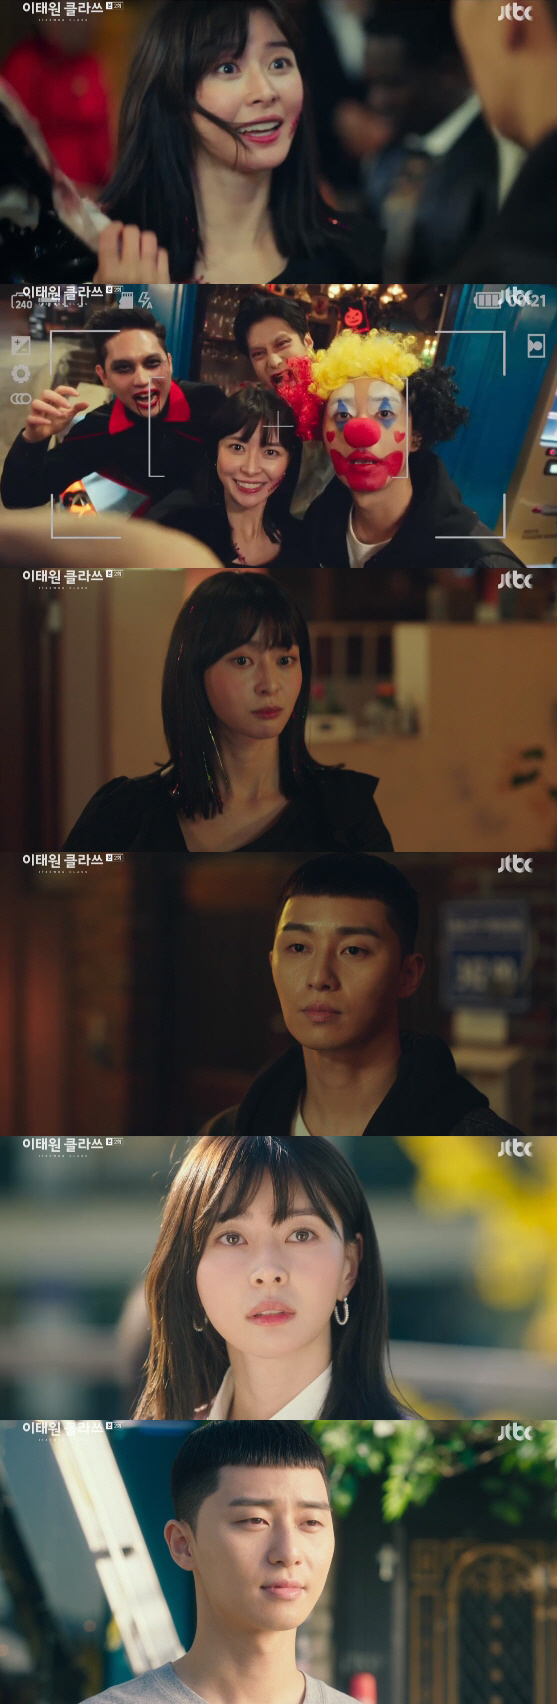 Itaewon Klath Park Seo-joon and Kwon Nara reunited after seven yearsIn the JTBC gilt drama Itaewon Klath broadcasted on the 1st, Park Seo-joon, who lives a different life after his fathers death, was portrayed.Park soon went to see that Murderer, who killed his father, Park Sung-yeol (Son Hyun-joo), was the Fountainhead (Security).Roy swung his fist at the Fountainhead, who saw him and stepped back, saying, Why did you kill our Father?To The Fountainhead, who apologized late, Park said, Its late. The person who will be apologized is dead.Roy, who lost his temper, tried to hit the Fountainhead with a stone, and at that moment Oh Byung-hun (Yoon Kyung-ho) and Oh Soo-ah (Kwon Nara) appeared.Oh Soo-ah mentioned Park Sung-yeol and said, No one wants this situation.Then, Roy went to prison for assaulting Jean The Fountainhead.Chang (Yoo Jae-myung) went to Roy and told him to kneel in front of his son, The Fountainhead, and apologize.Park said, It is your son who will kneel. So, Chang said, Did Park teach you that. I preach another sermon.The words that are not used to protect self-esteem. If there is no benefit, it is stubborn and a guest. Reflection is long in it. Chang then called Oh Soo-ah to support the entrance fee and living expenses.Oh Soo-ah, who was quick to notice, said, Does the price have to testify against the new Roy? And Chang said, Im just trying to do a good job for the old man.I can do what I saw, he laughed.The Funtainhead, who was suffering from guilt, visited his father Chang and asked him to agree with Roy, but Chang advised him not to feel guilty if he was the successor to Chang.This chicken is Roy, he said, not having to feel sorry for the chickens neck. My father is right, said the Fountainhead, who was brainwashed by Chang.The new Roy is a chicken, he said, twisting the chickens neck.Oh Soo-ah went to see Roy, who was sentenced to prison; Oh Soo-ah informed him that he had gone to college with a scholarship at his funeral home, saying, Thats what I got from reporting and drying you up.Im sorry, Im sorry Im not as strong and cowardly as you are. So Park said, Thank you for being so sweet.If you didnt stop me, I would have been here as Murderer, not attempted. If you decide, stick to it. You have done nothing wrong. Oh Soo-ah, who managed to regain a smile on the top of Roy, asked what he would do after he was released from prison.Then, after seeing the Janga autobiography, Park said he wanted to open a store, and Oh Soo-ah asked, Revenge? but Park denied it.Oh Soo-ah asked Roy, who was returning after the visit, Why did you ask me for a number? So Park said, Im sorry, I told you not to like it.I liked it, he replied honestly. Oh Soo-ah said, Do you still like me? I hate poor men.You will make a lot of money out of it, said Park, and smiled, From now on, rich is my dream. Park Roy recalled the word revenge after breaking up with Oh Soo-ah, and reiterated in his mind that it feels like the heart is filled with the word.Two years later, the new man was sent to Itaewon, where Oh Soo-ah lived, where he was reunited with Oh Soo-ah.The two men, who had met for a long time, talked about something they had not been able to do, and Roy said that seven years later they would ride a fishing boat to set up a store in Itaewon.So they spent the last night before they parted ways at Itaewon, where for the first time in their lives, Park enjoyed Halloween and had special memories with Oh Soo-ah.Oh Soo-ah told Park Roy on his way home, Im sorry. You know what Janga means to you. You can blame him.But Park said, You always want my happiness. I do not know how strong one of the sentences on the letter was when I felt that I was alone in the world after sending Father.It is ridiculous that you are grudged. You are living your life hard and I am always grateful. He comforted Oh Soo-ah again.Oh Soo-ah asked if he would sleep at his house before he broke up with Roy, but Roy laughed, saying, Im not rich yet, and the two broke up like that.Meanwhile, Oh Soo-ah, who worked at Jangga seven years later, reunited with Park Roy, who was preparing a store called Sweet Night at Itaewon.